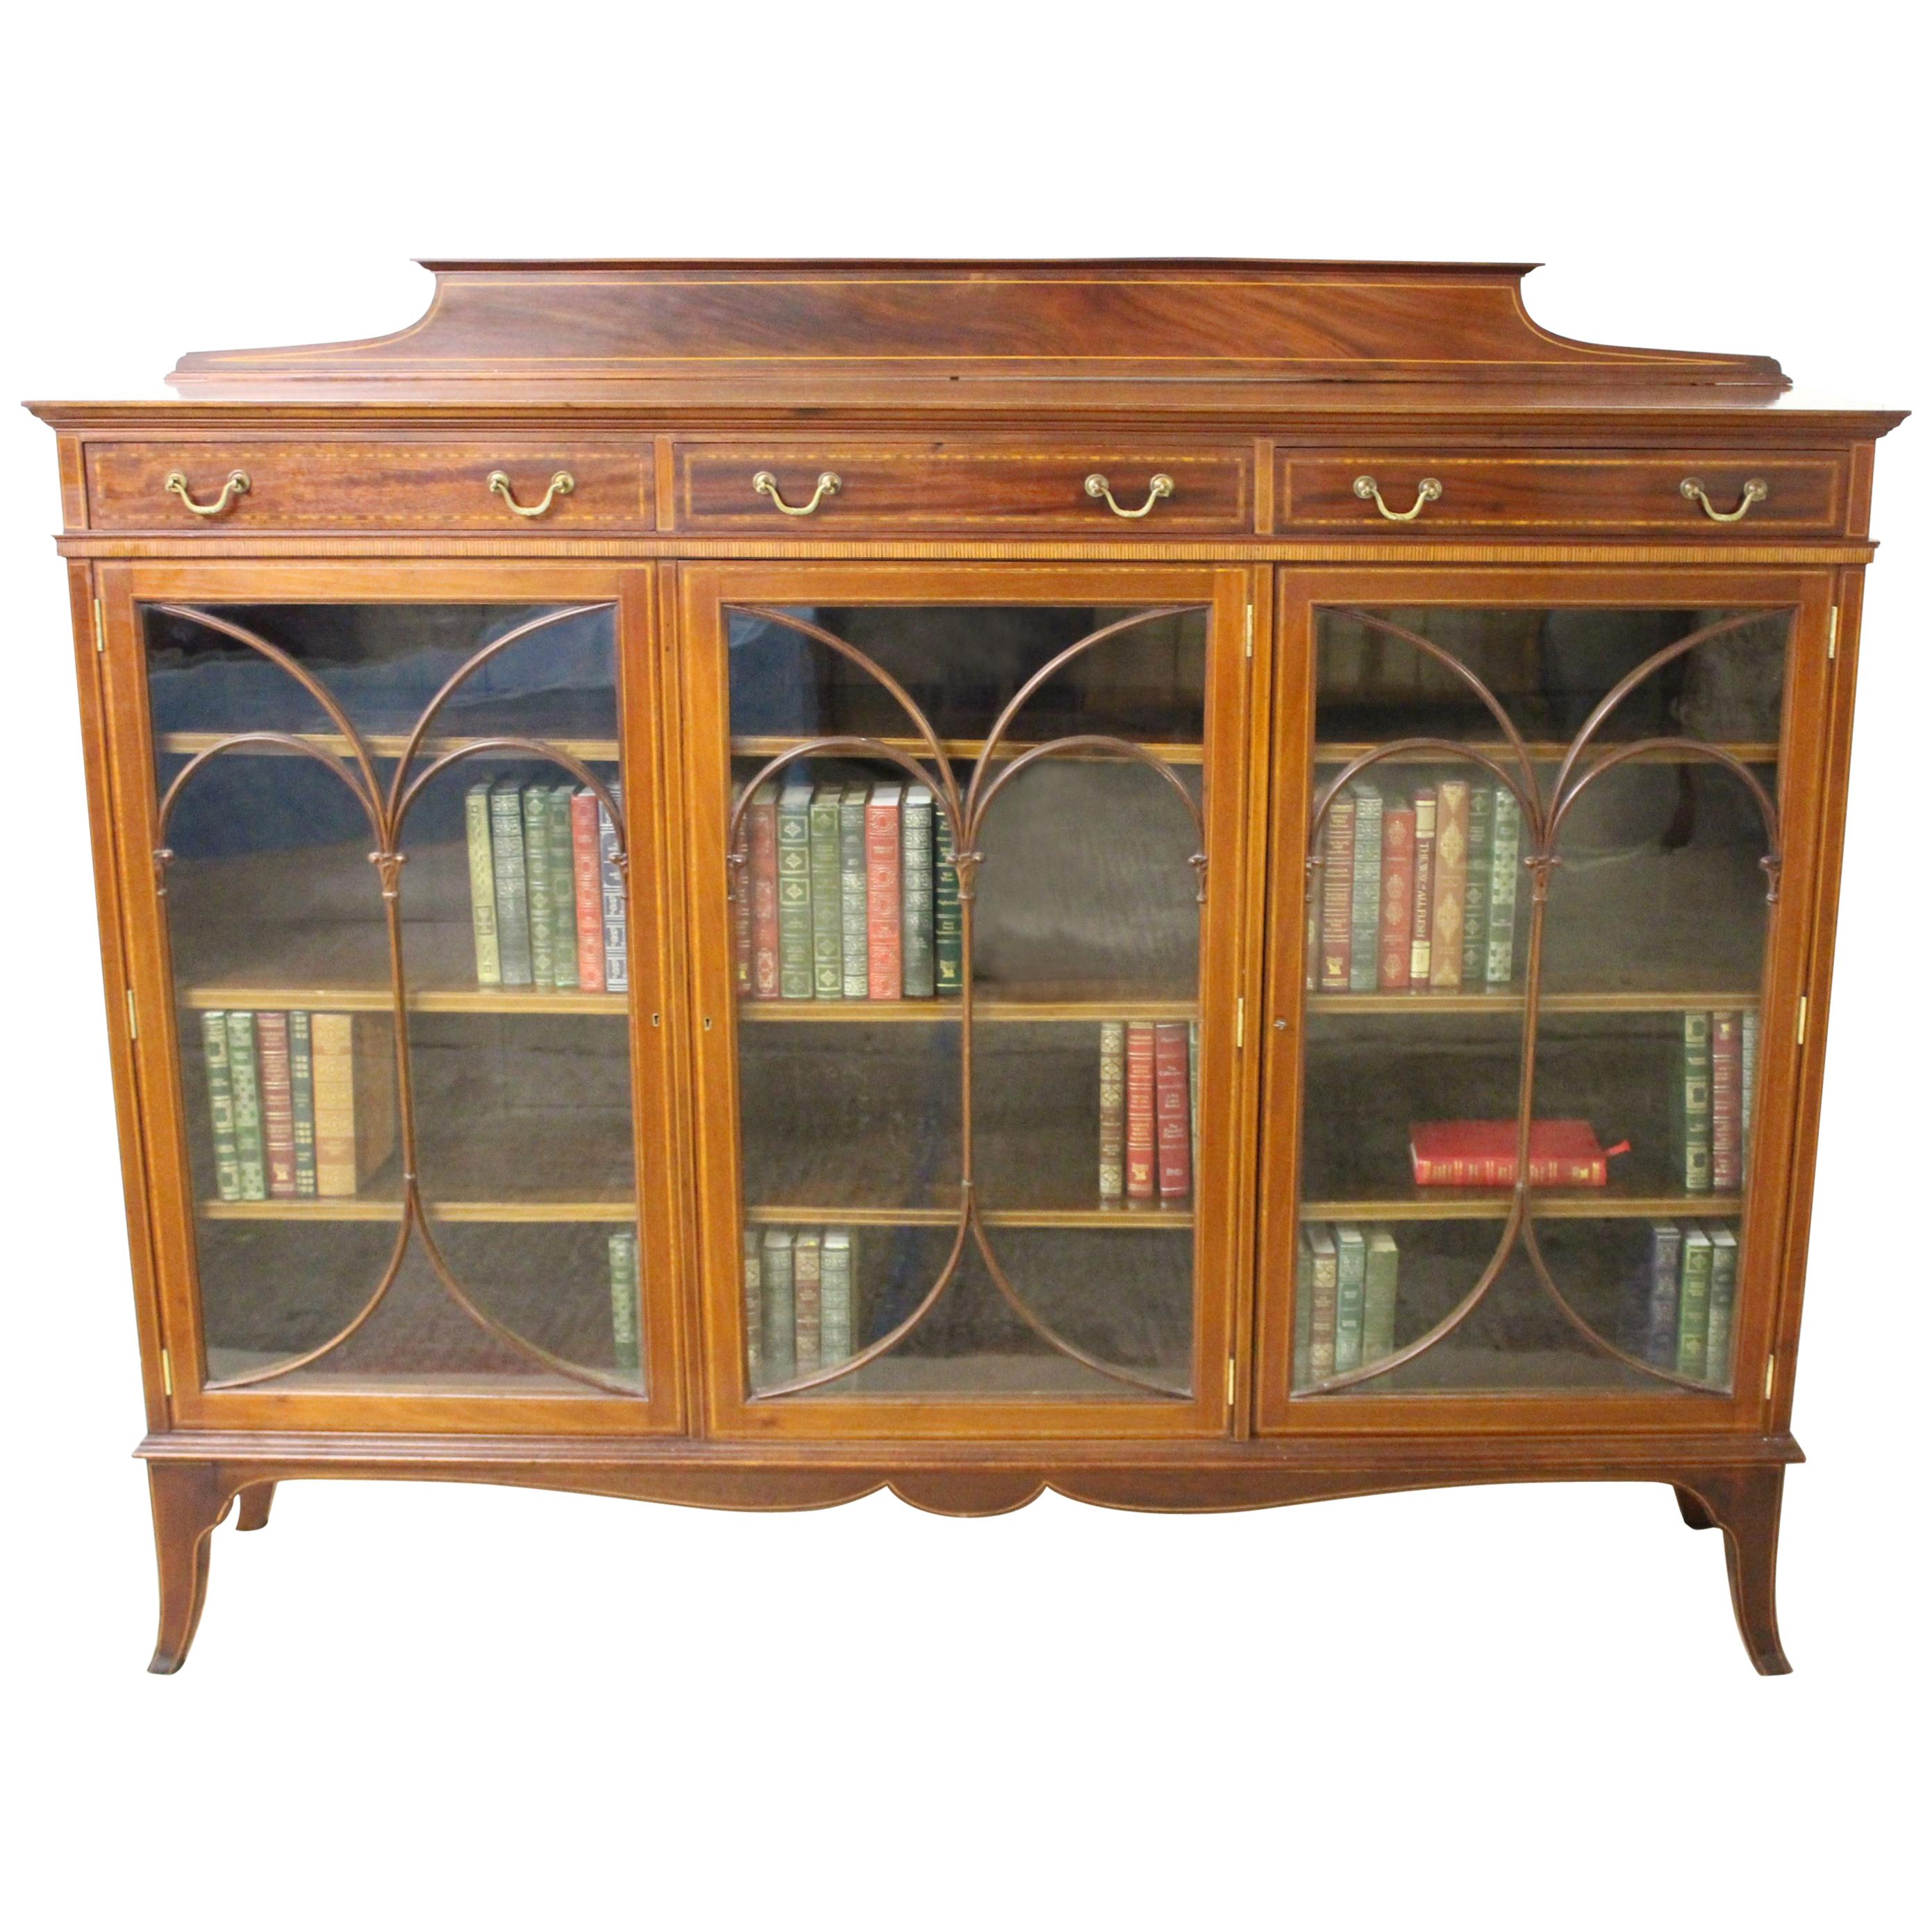 Edwardian Inlaid Mahogany Bookcase by Maple and Co For Sale